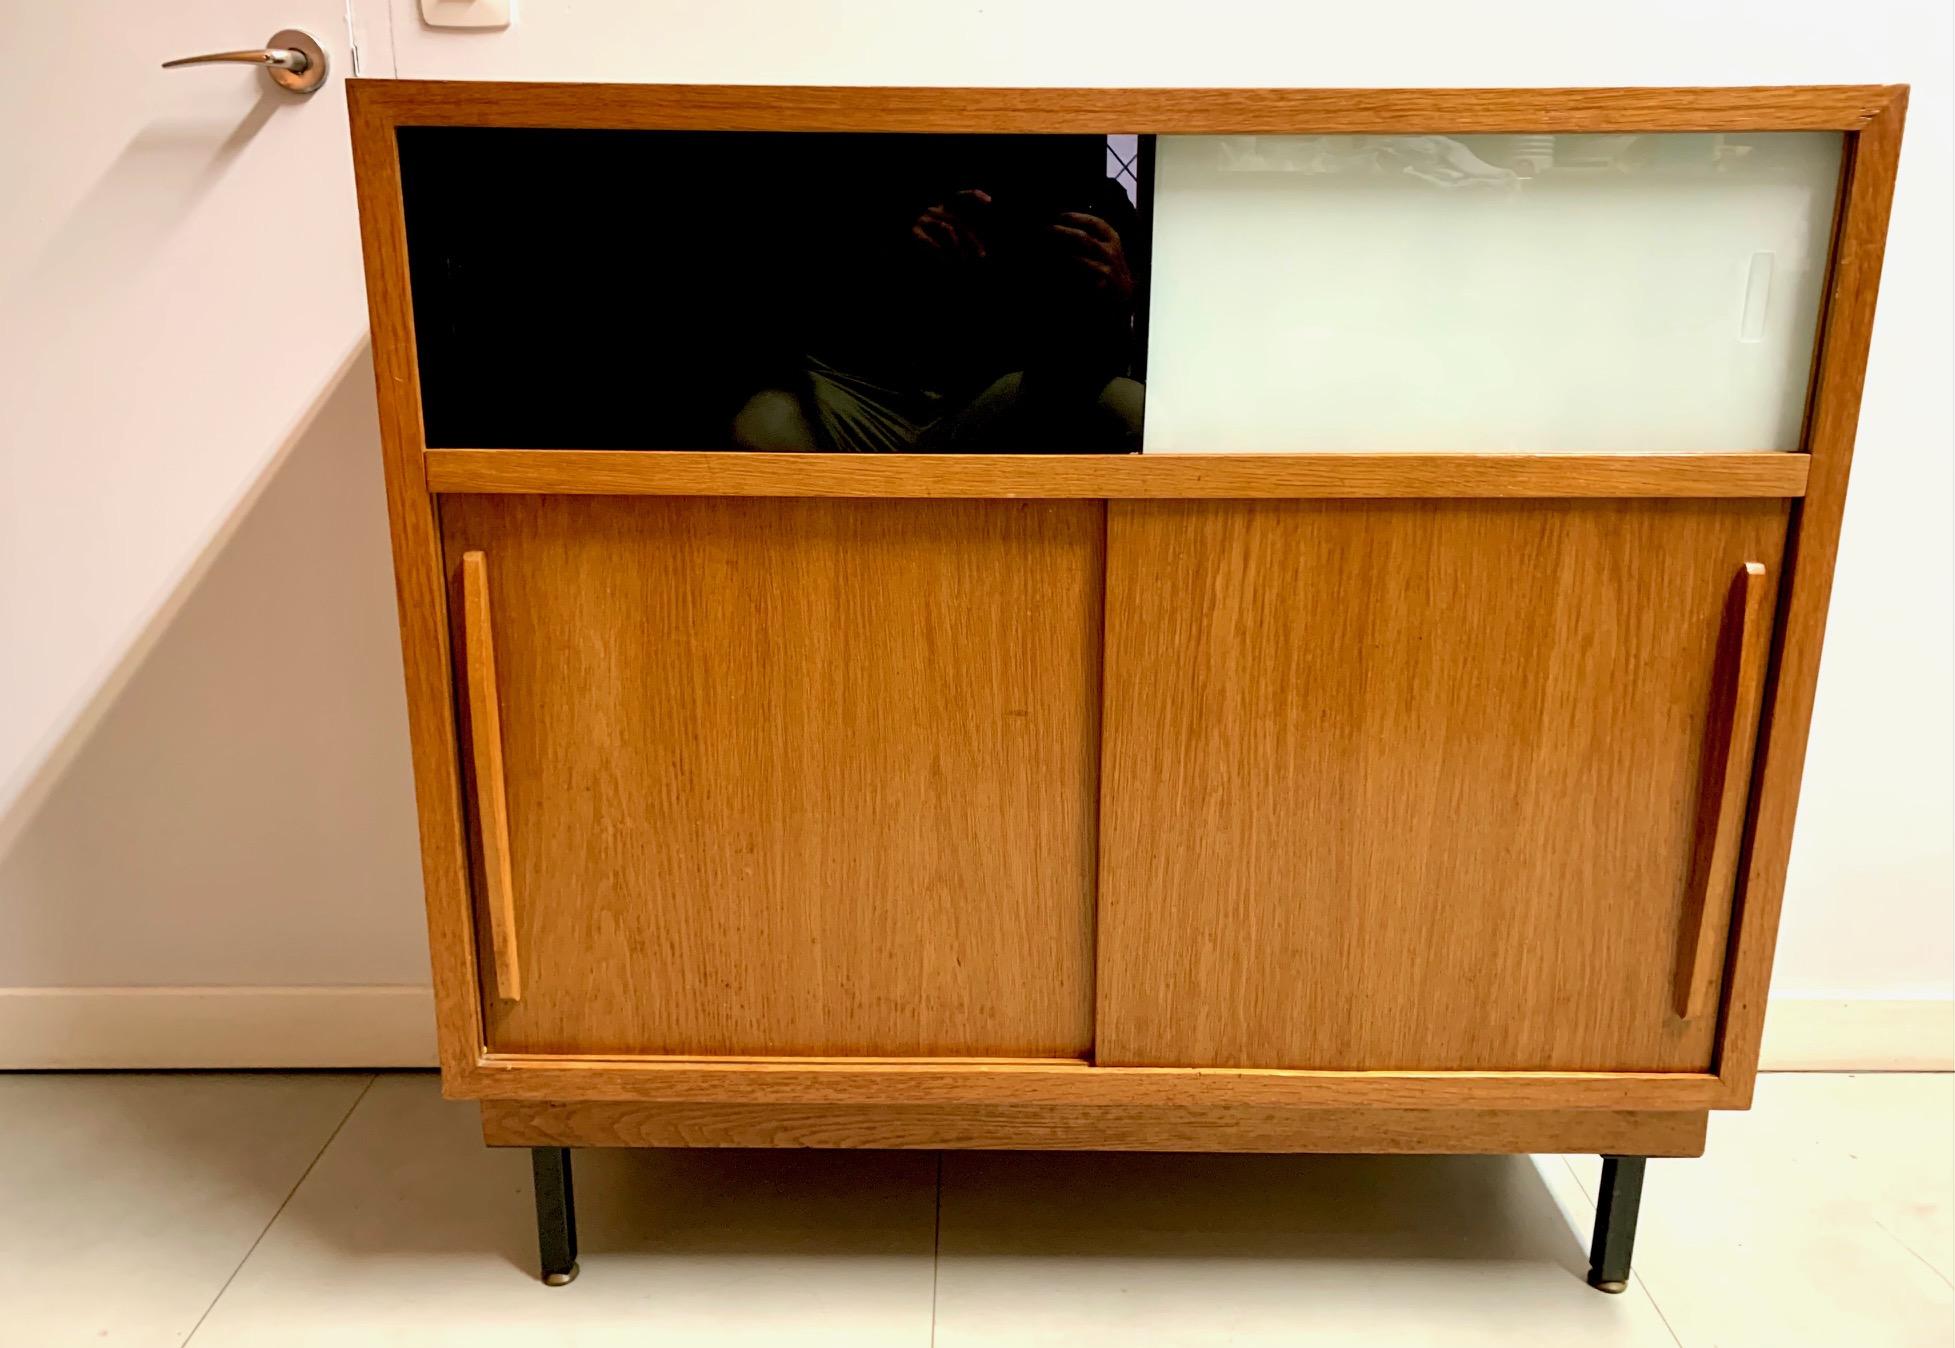 French cabinet from the 50s, in oak wood and lacquered glass in two colors, black and white, ending in metal legs.
The windows are sliding doors in the upper part, the lower part in oak wood, it is in perfect condition.